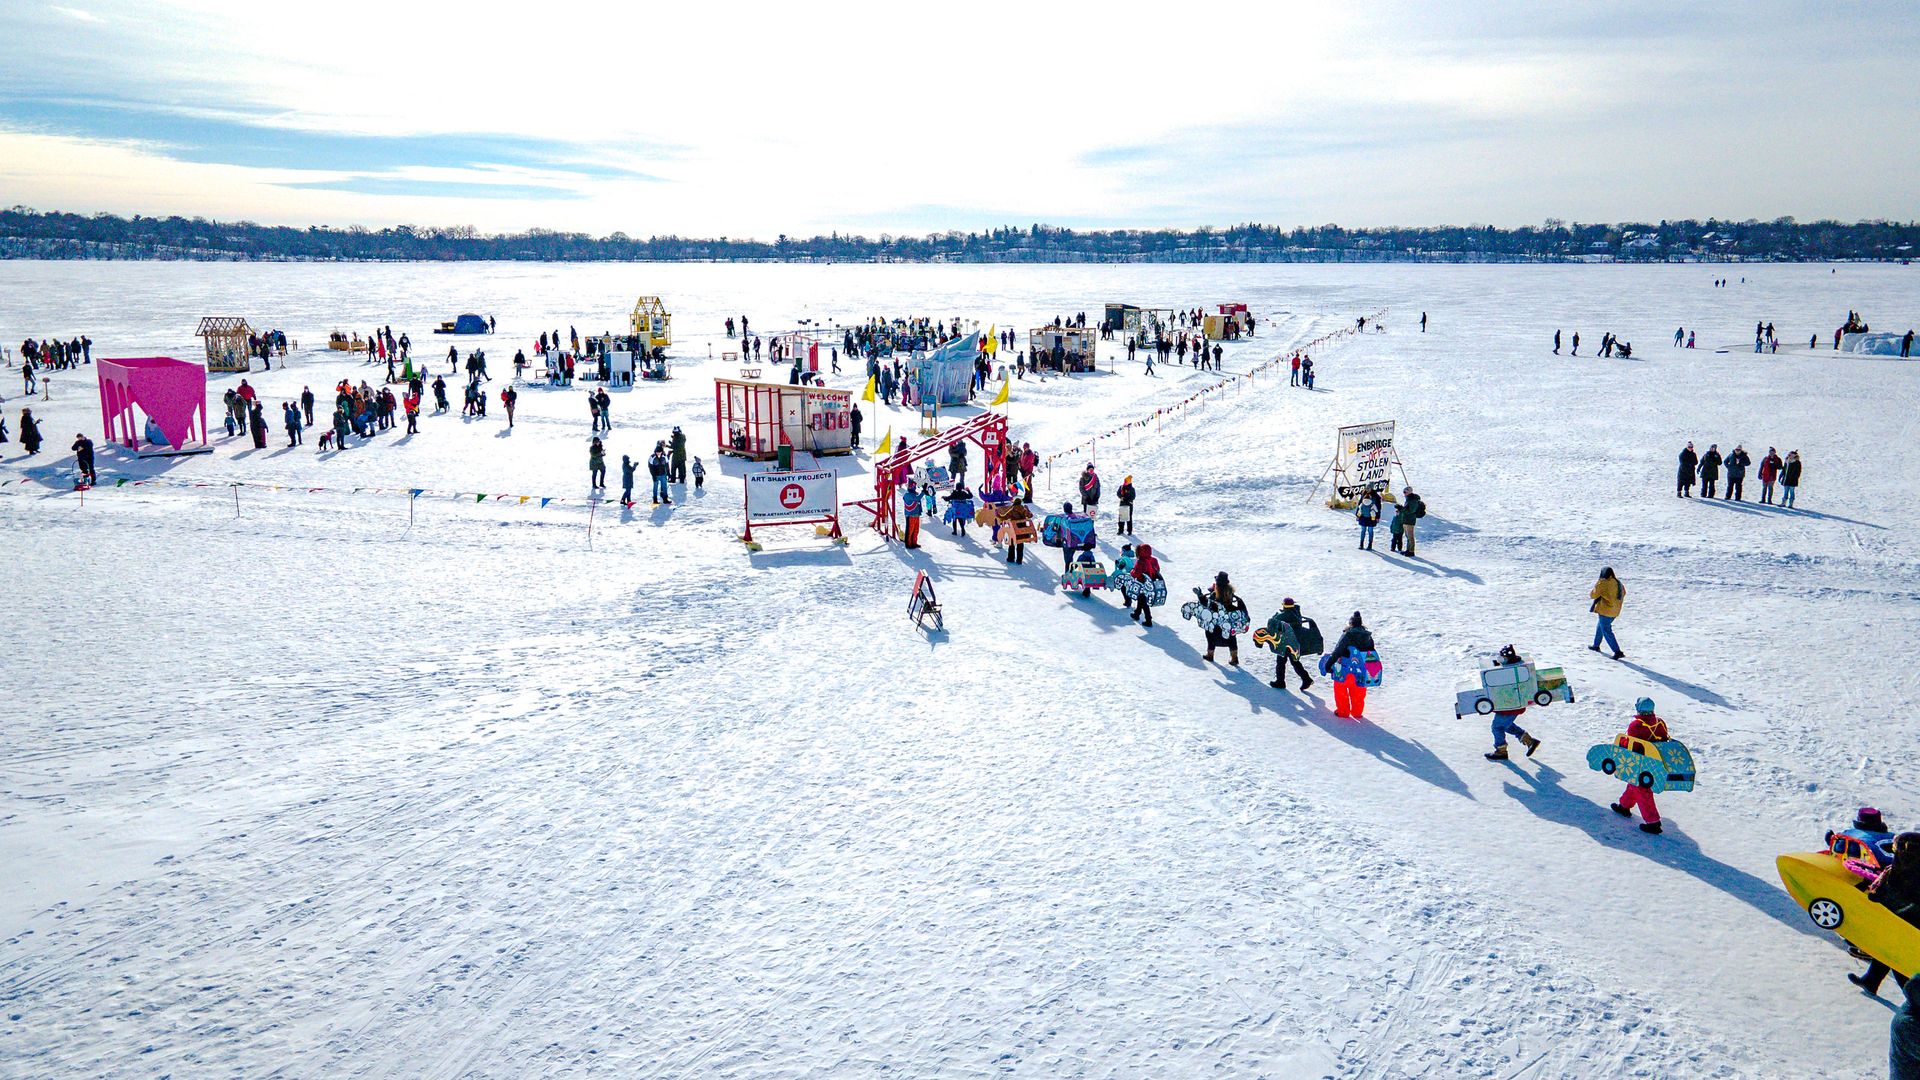 A large group of people gathered on a frozen lake.